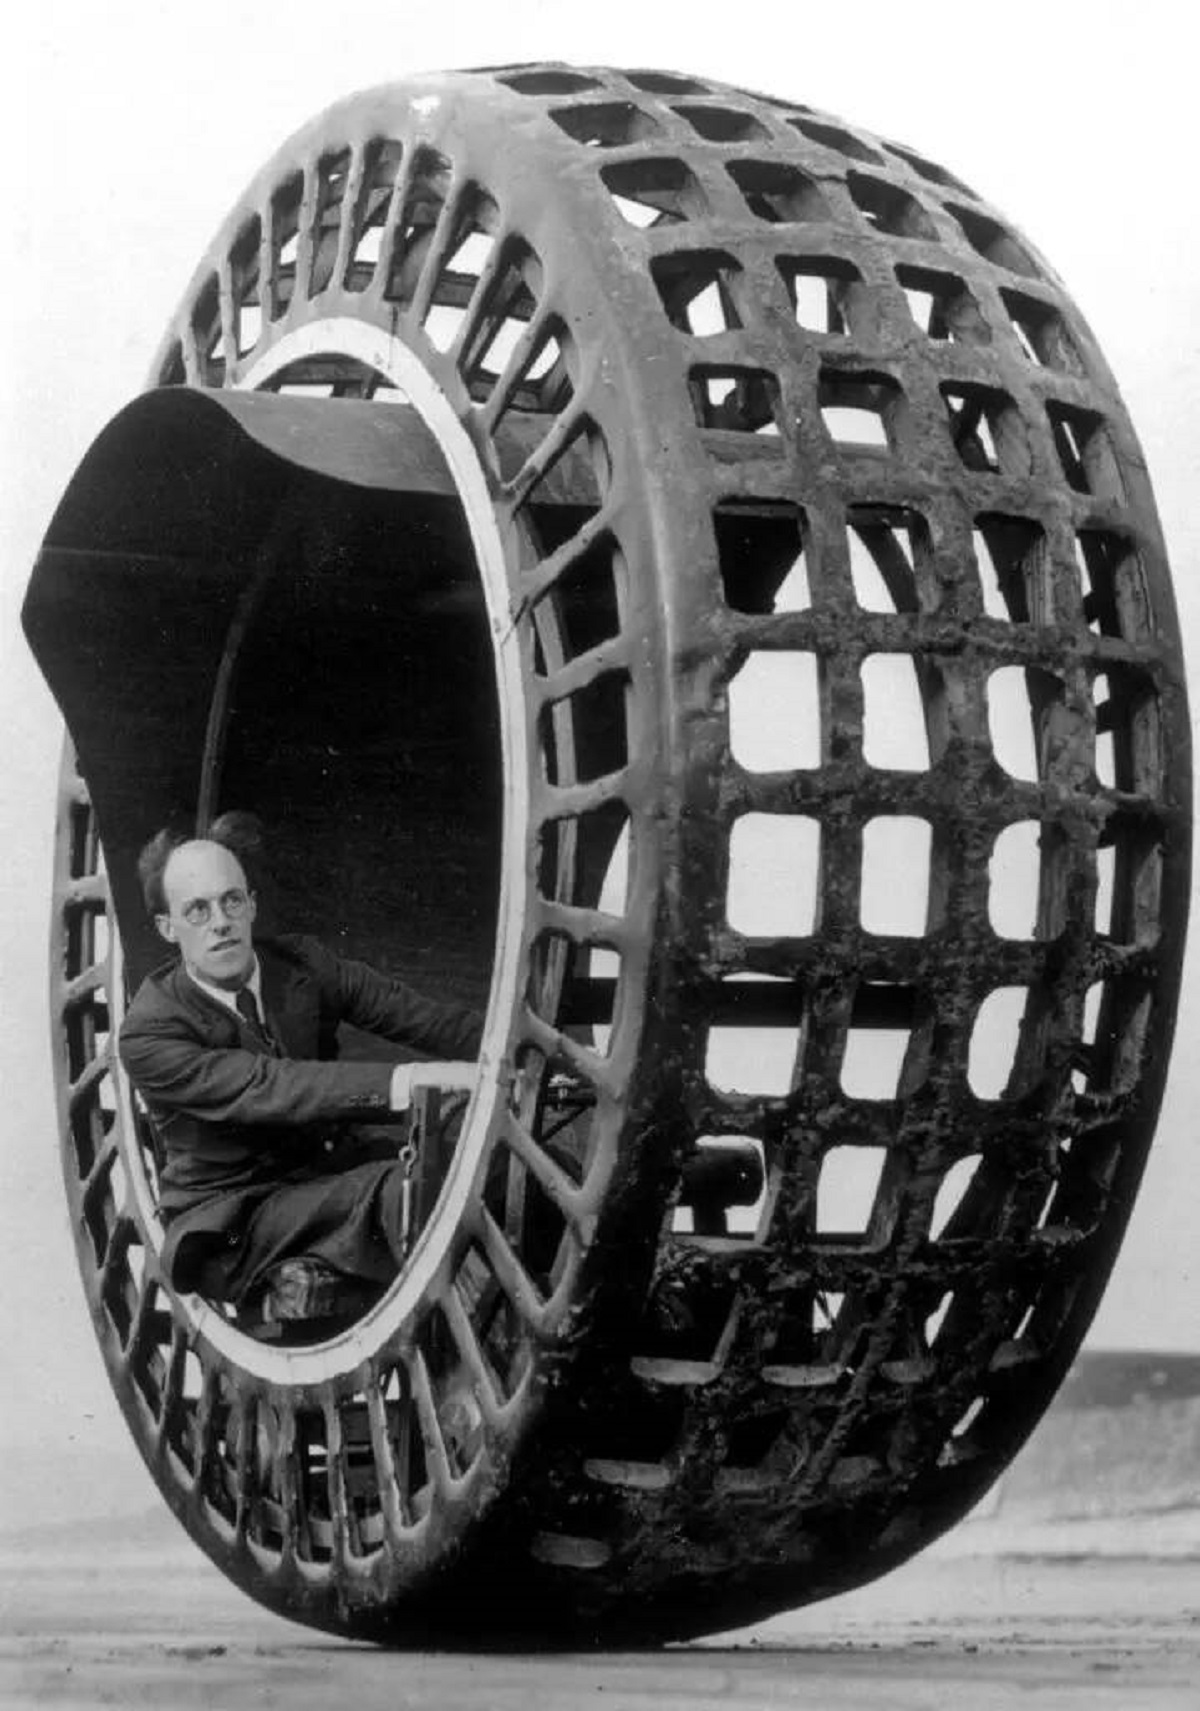 This is the Dynasphere, a giant wheel vehicle invented by Dr. J. H. Purves that could go as a fast as 30 MPH: